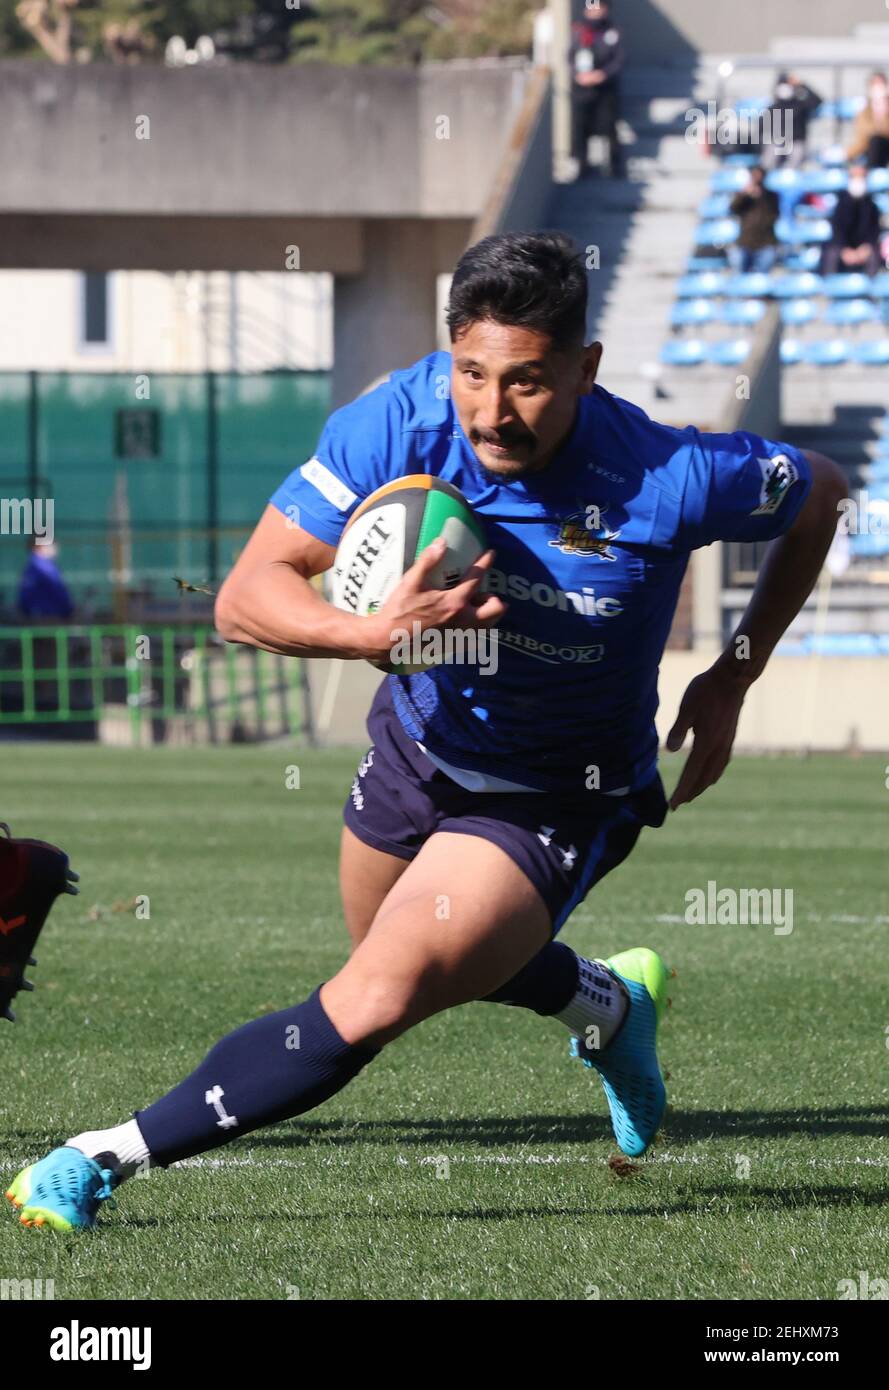 Tokyo, Japan. 20th Feb, 2021. Panasonic Wild Knights scrum half Keisuke Uchida carries the ball at an opening game of Japan Rugby Top League 2021 tournament at the Prince Chichibu rugby stadium in Tokyo on Saturday, February 20, 2021. Panasonic Wild Knights defeated Ricoh Black Rams 55-14. Credit: Yoshio Tsunoda/AFLO/Alamy Live News Stock Photo